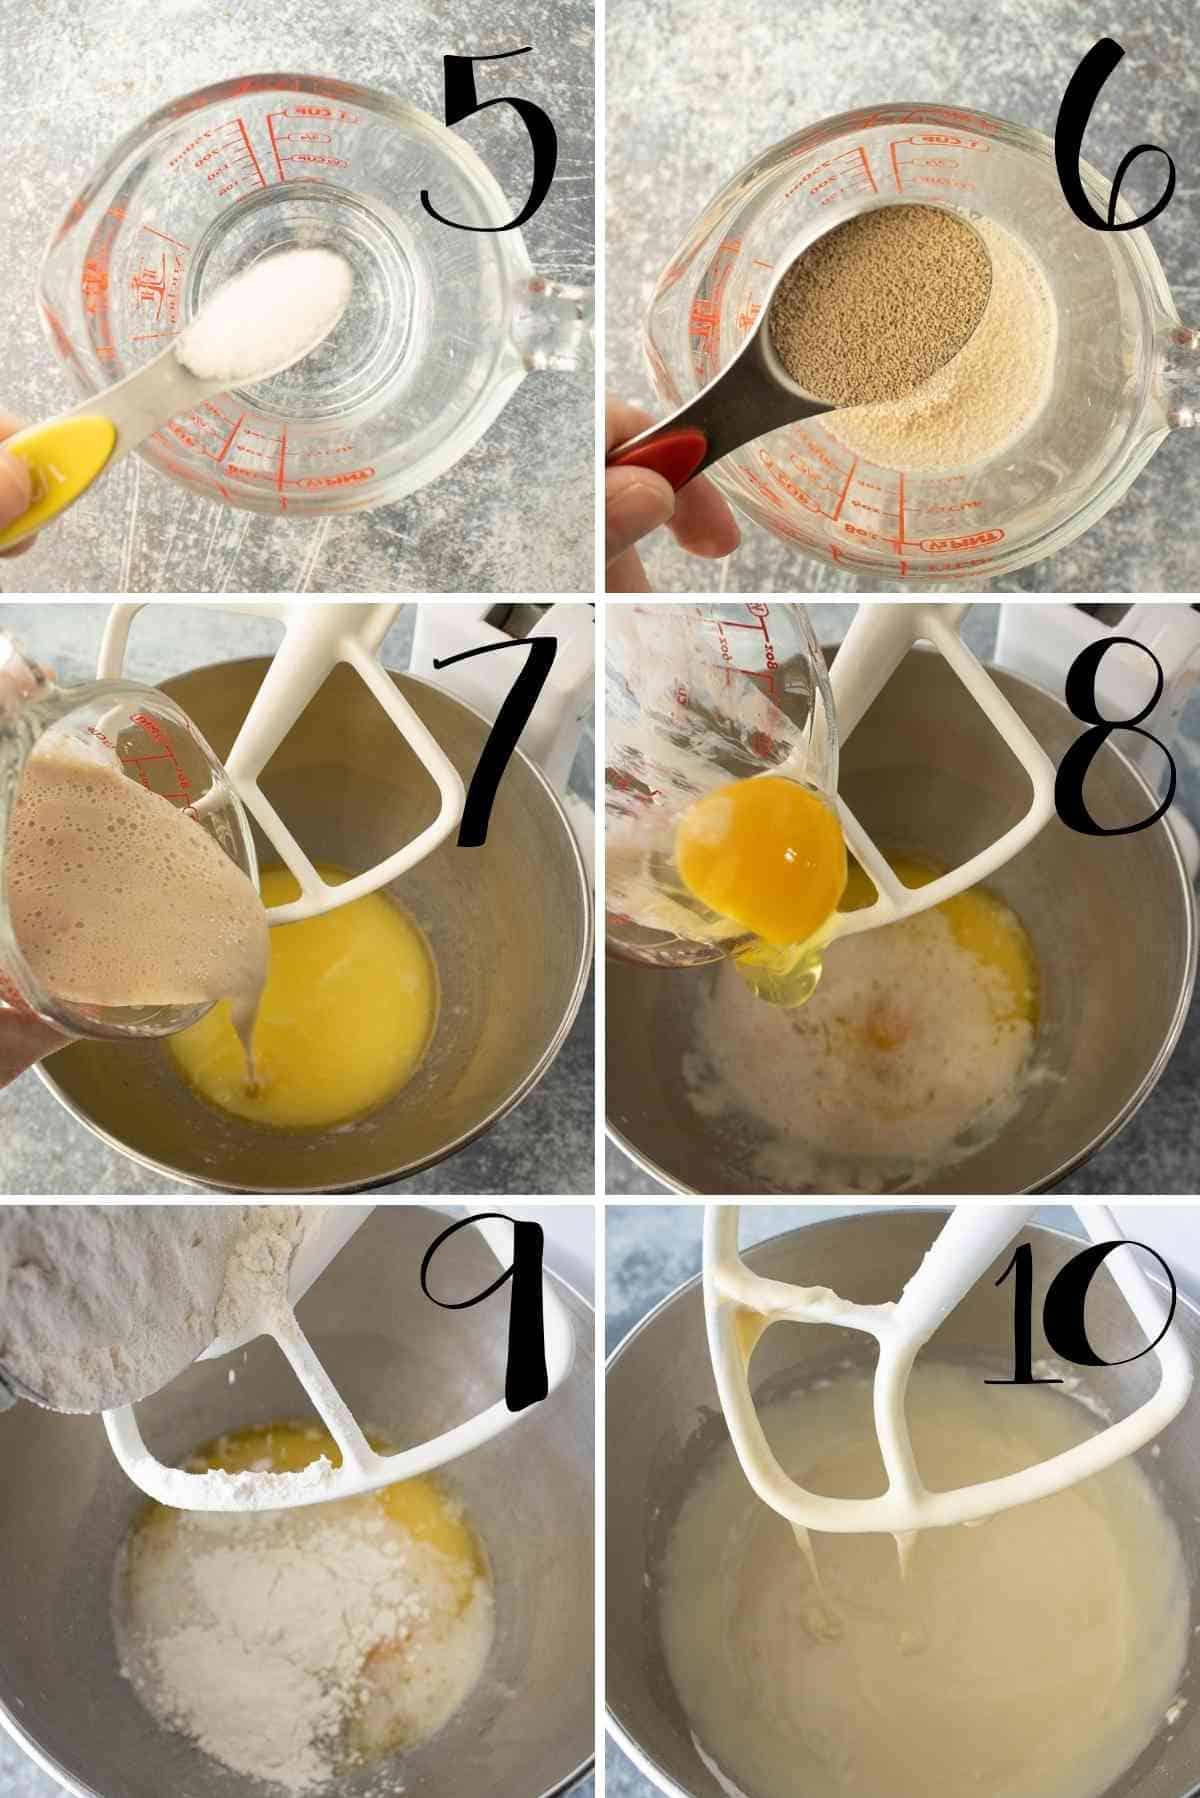 Activated yeast, egg and part of the flour added to the mixing bowl and beat for 5 minutes.